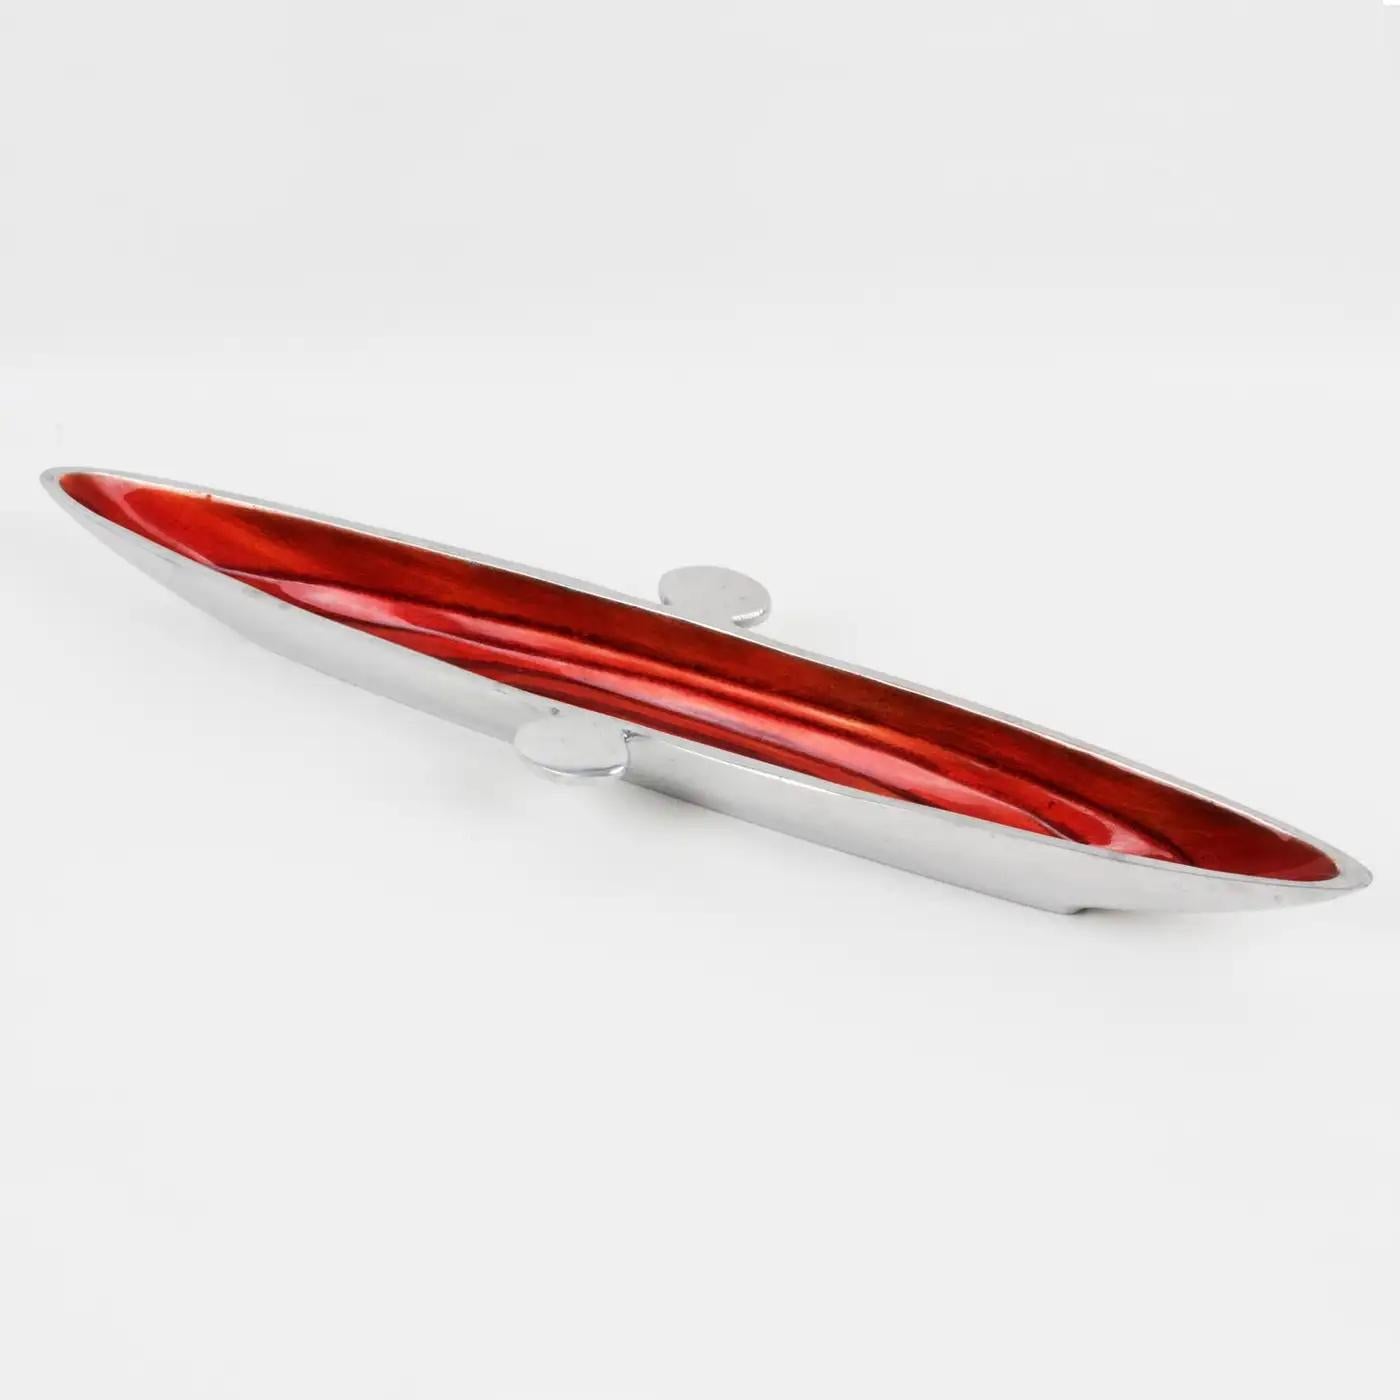 Space Age Vide Poche, Bowl, Catchall or Desk Tidy Aluminum and Red Enamel In Excellent Condition For Sale In Atlanta, GA